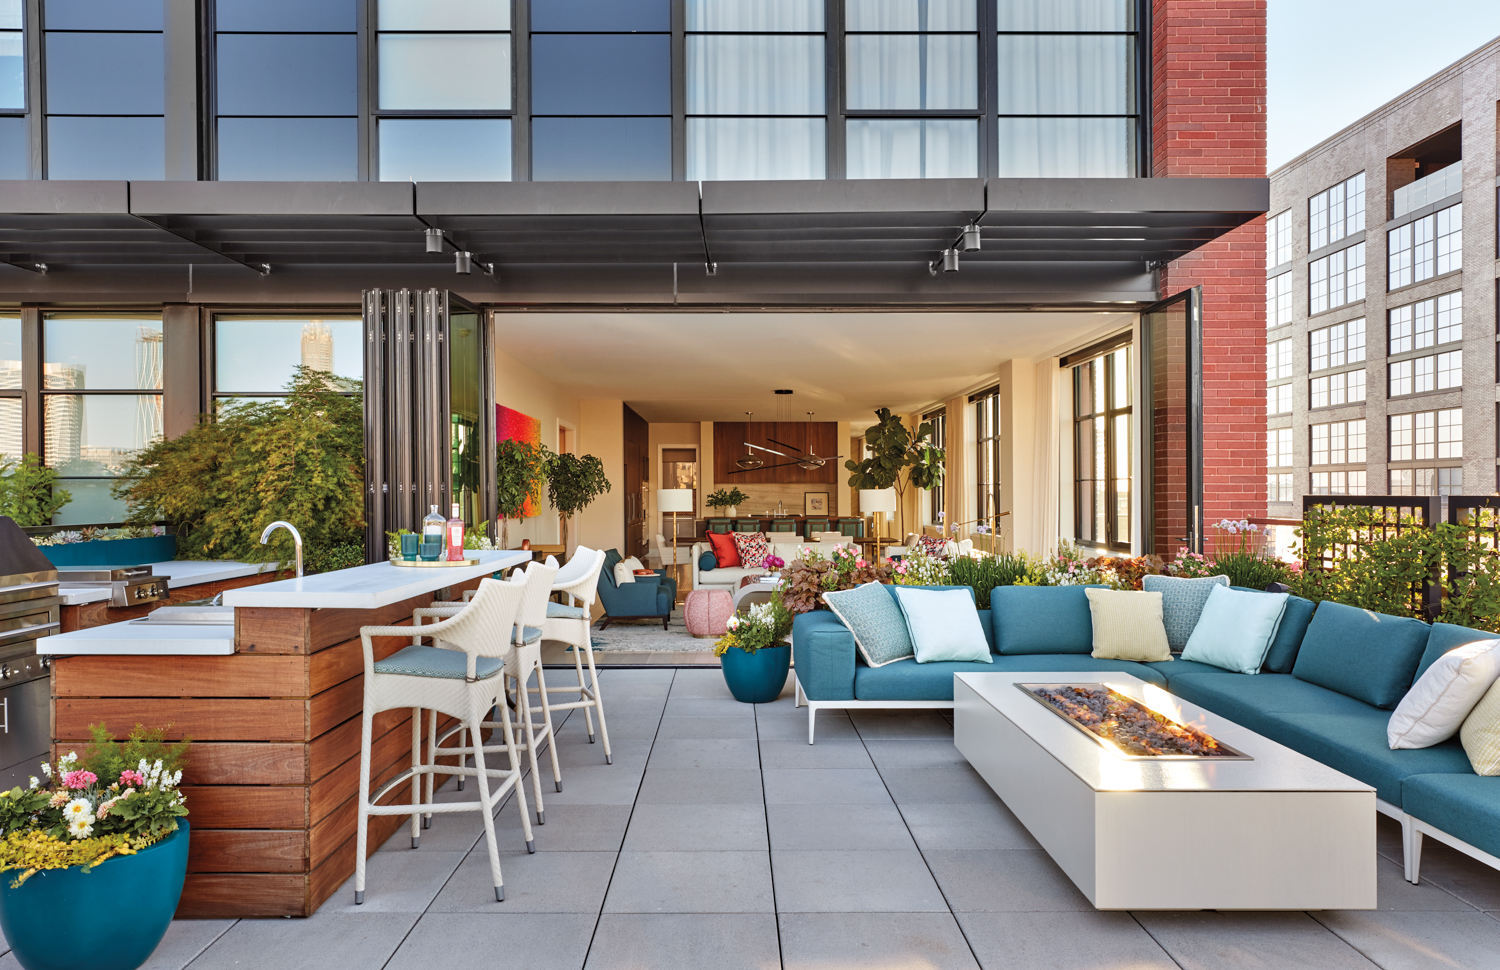 Urban patio with blue sectional, fire pit and ipe wood bar that is perfect for outdoor entertaining.